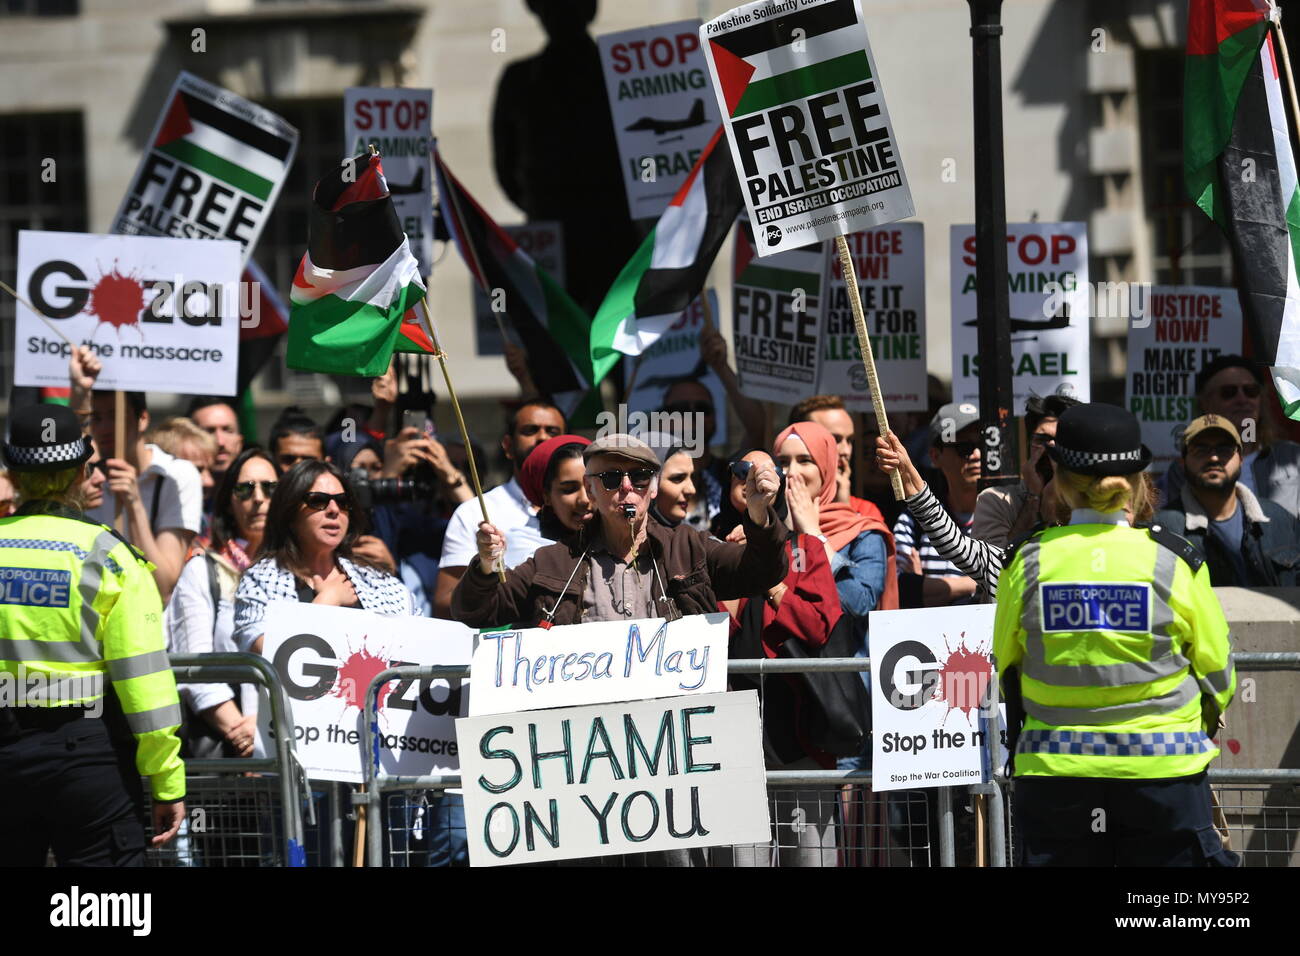 Demonstrators on Whitehall ahead of the arrival of Israeli Prime Minister Benjamin Netanyahu for a bilateral meeting with Prime Minister Theresa May at 10 Downing Street, London. Stock Photo